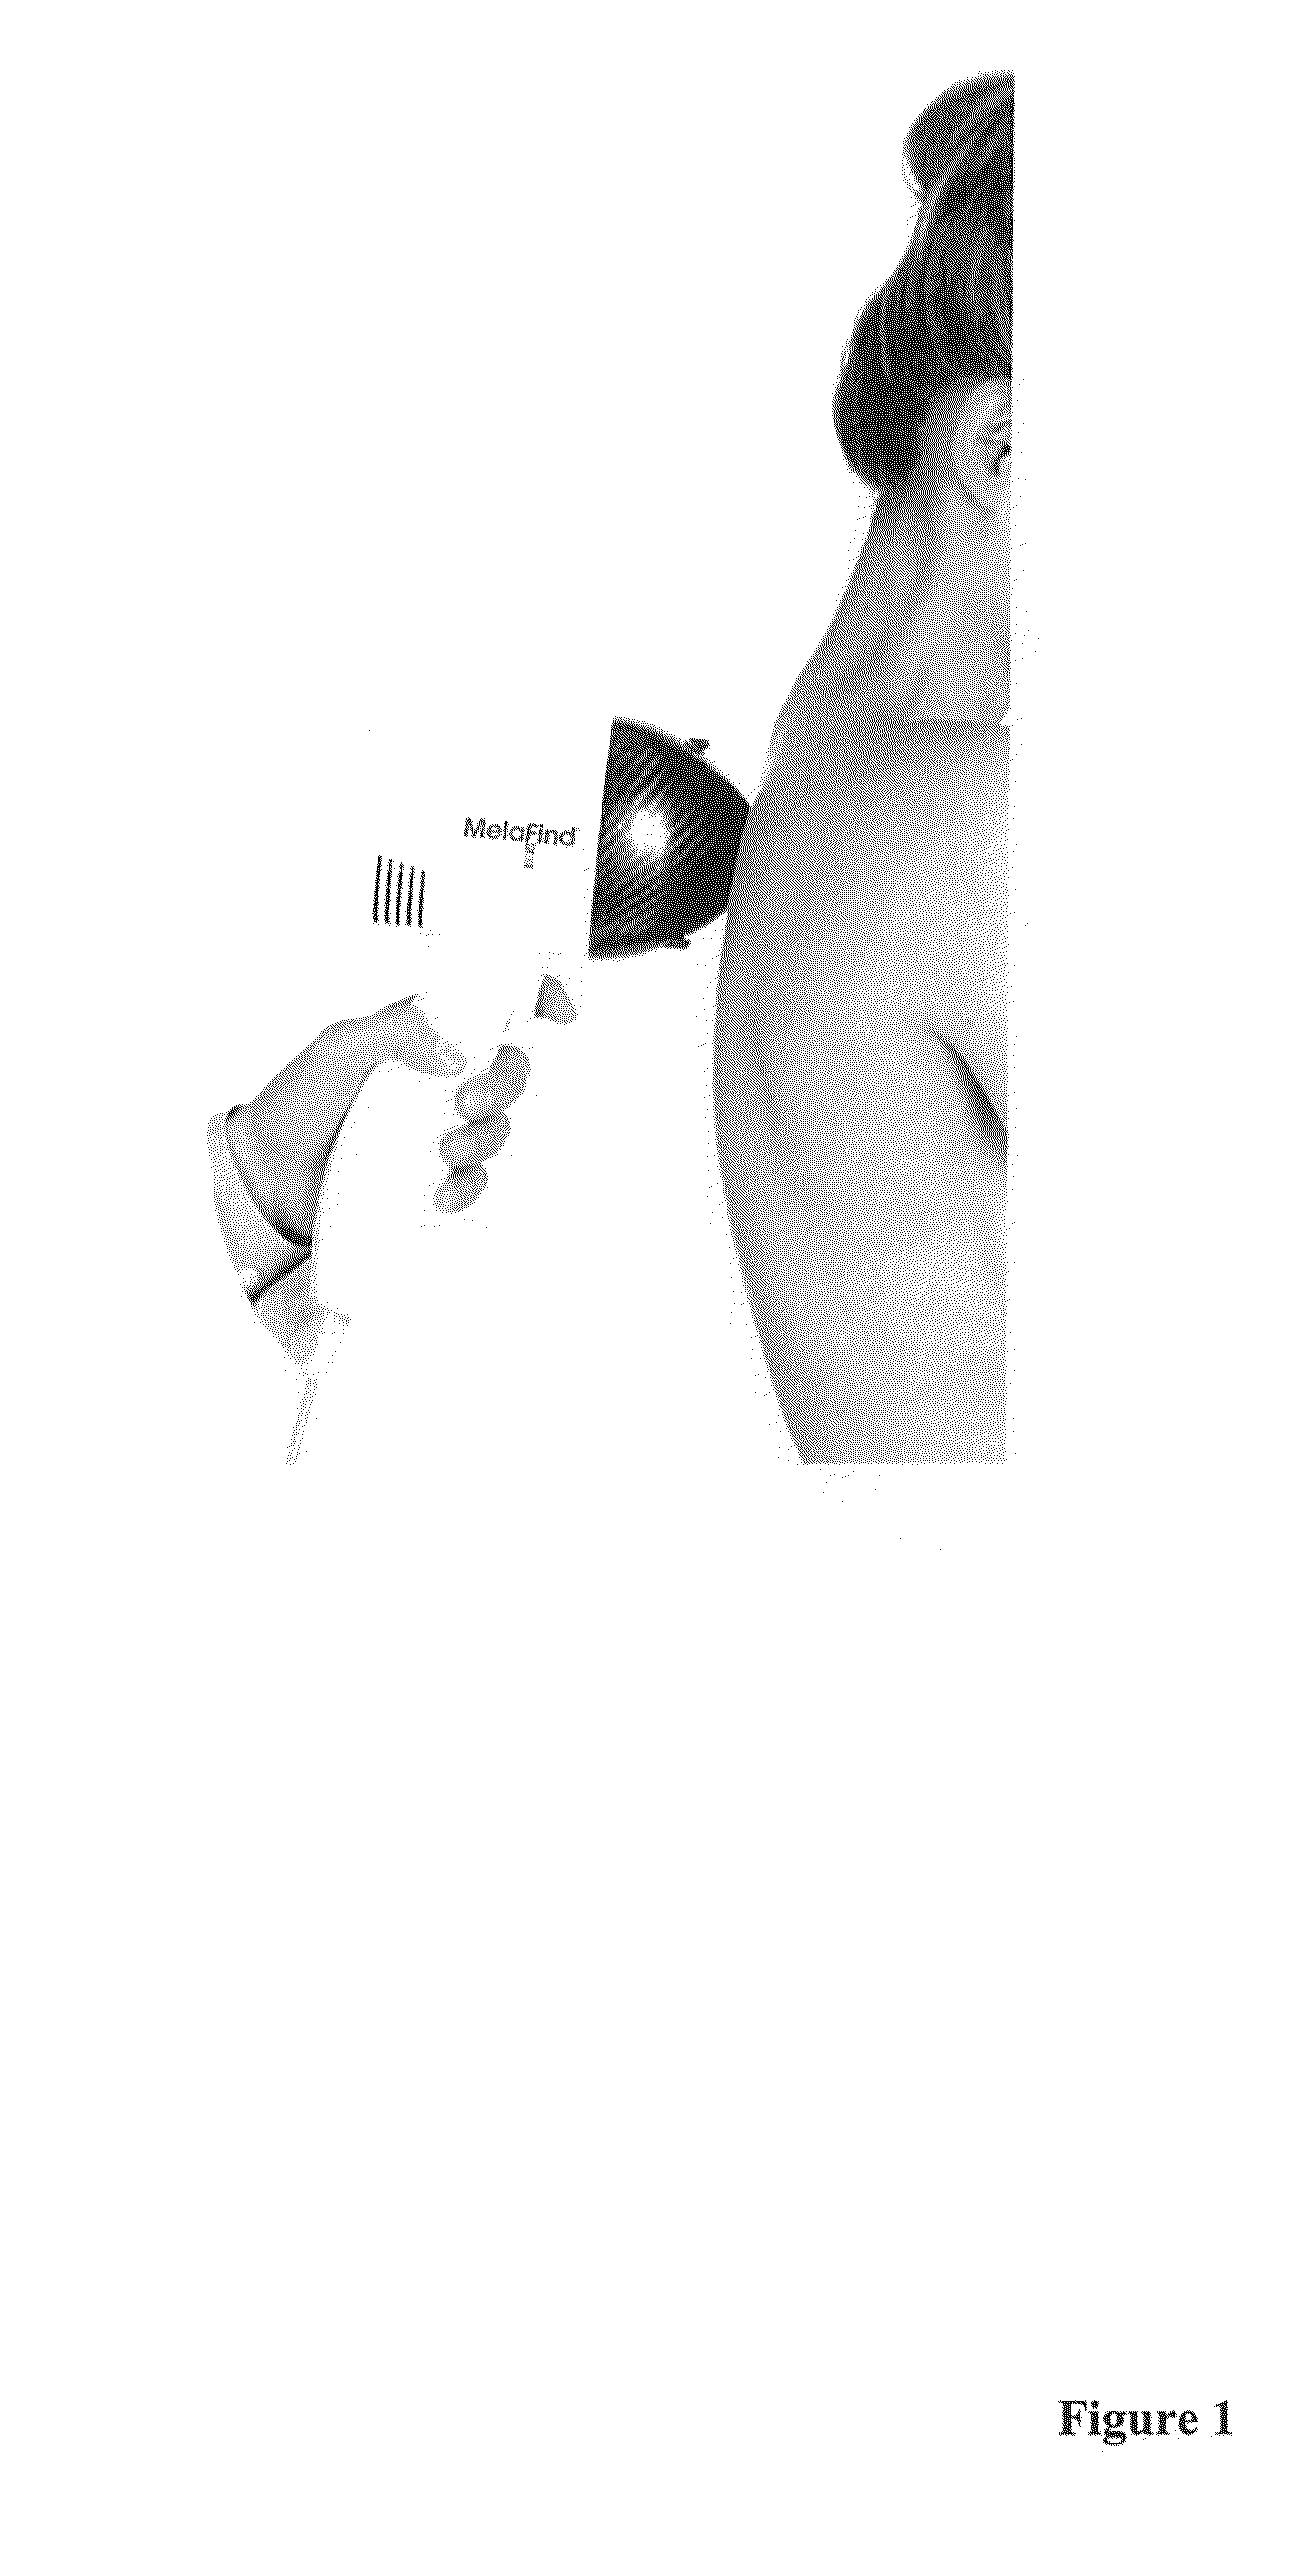 Three dimensional tissue imaging system and method